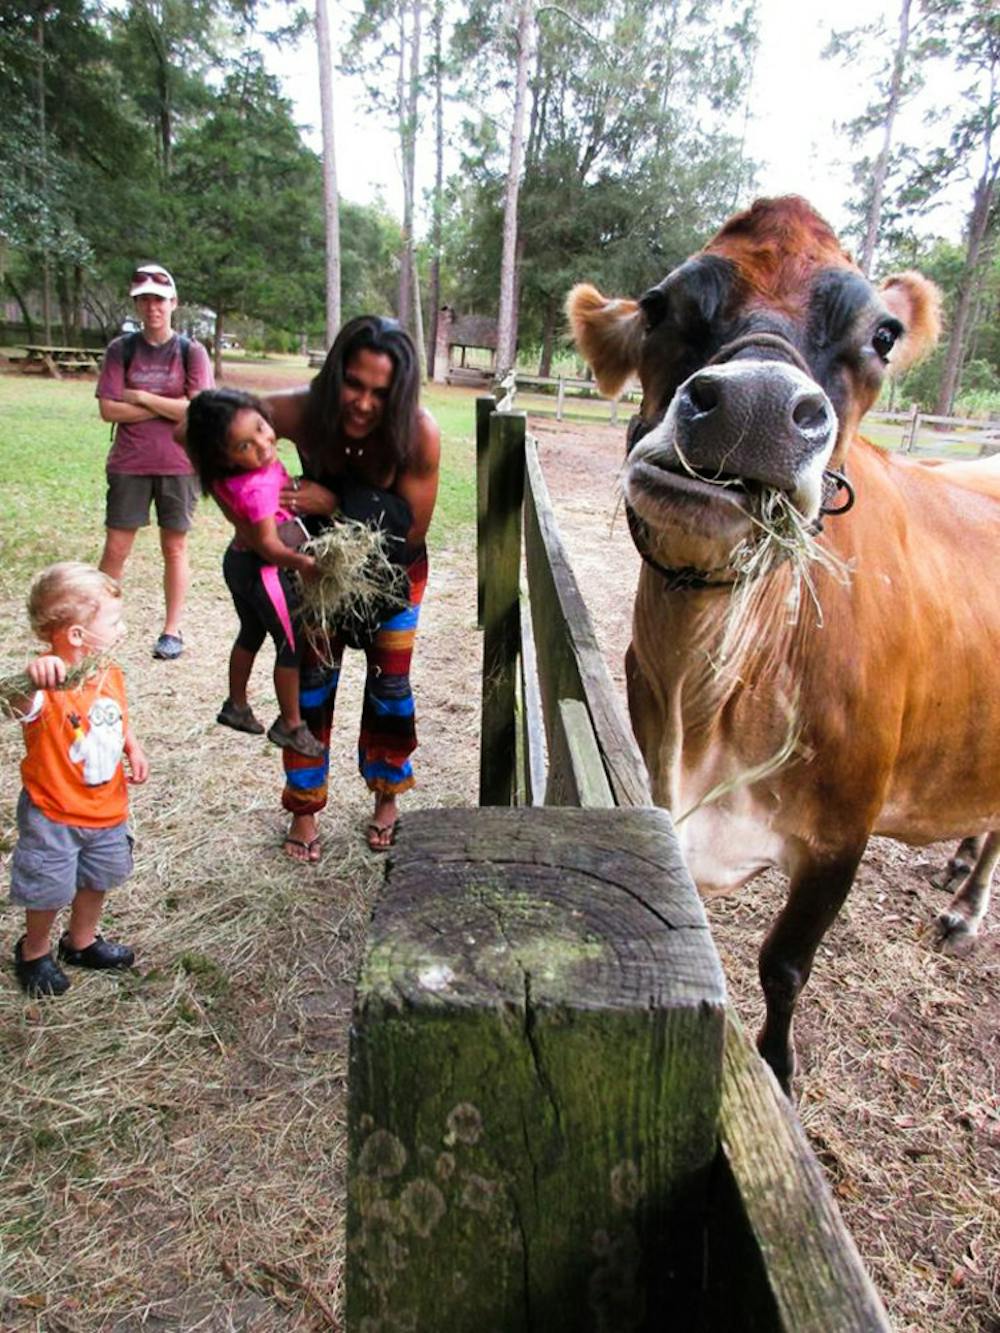 <p dir="ltr">Gainesville’s Morningside Nature Center hopes the de-stressing allure of fuzzy barnyard animals attracts more students — and other residents — to its weekly “barnyard buddies” events.</p>